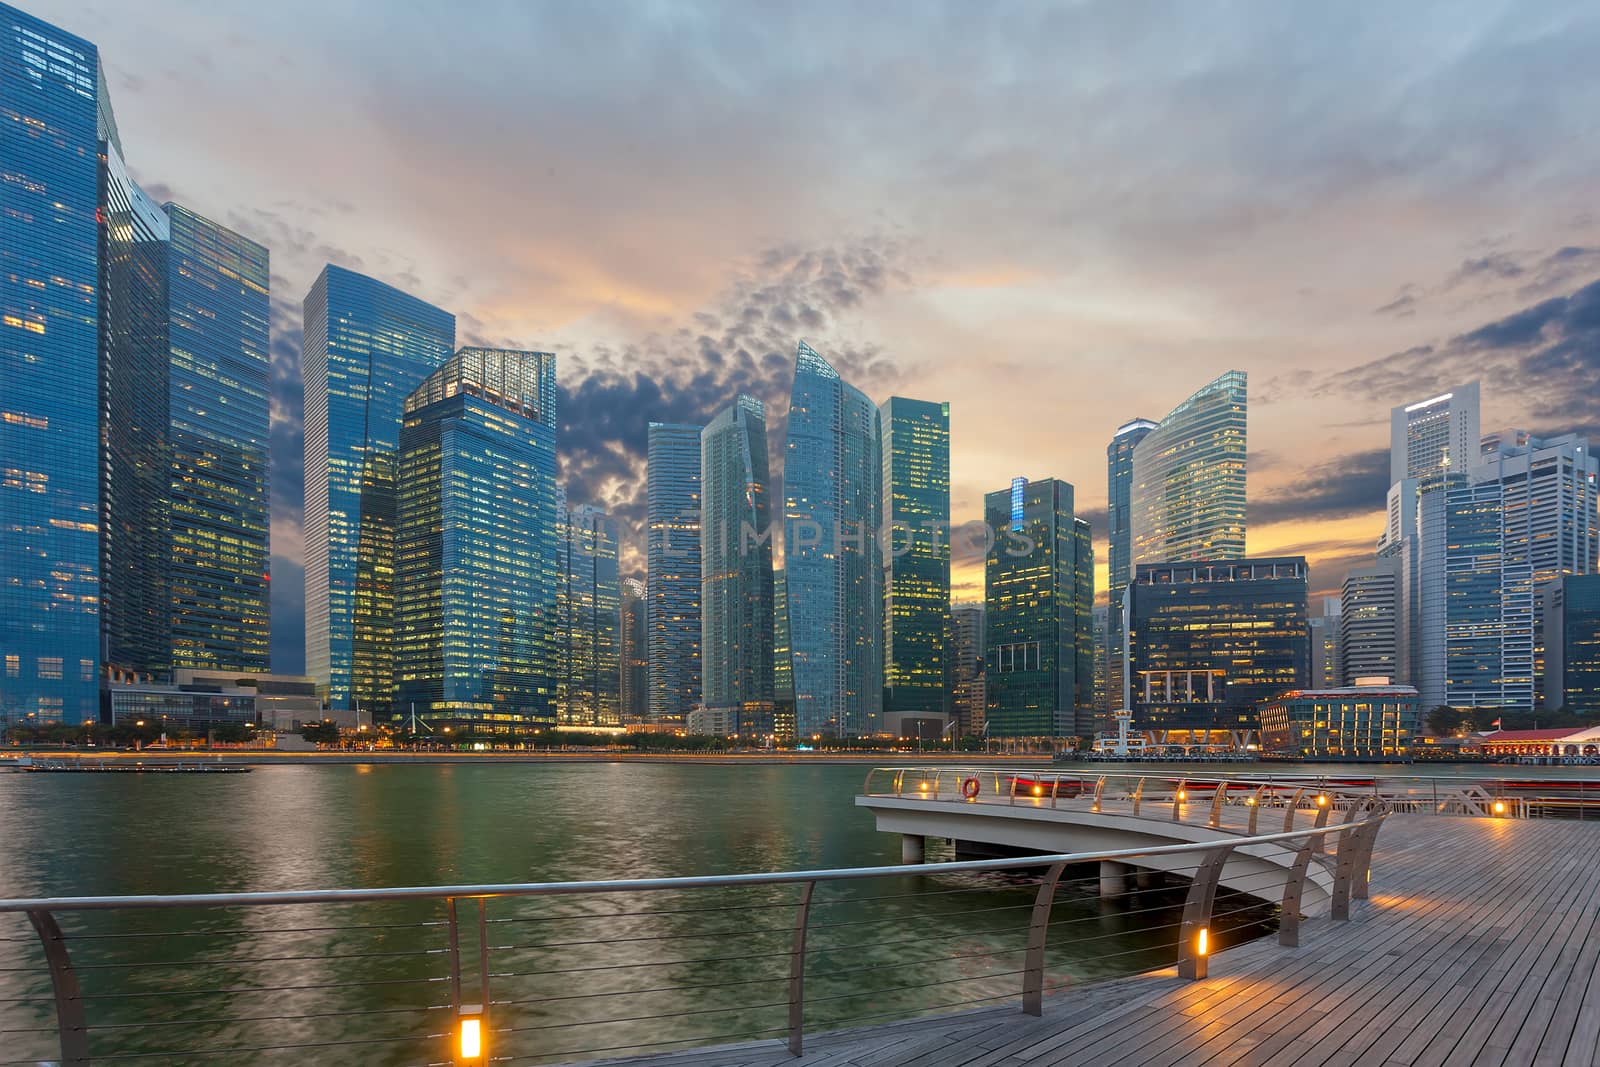 Singapore Skyscrapers by Marina Bay by Davidgn